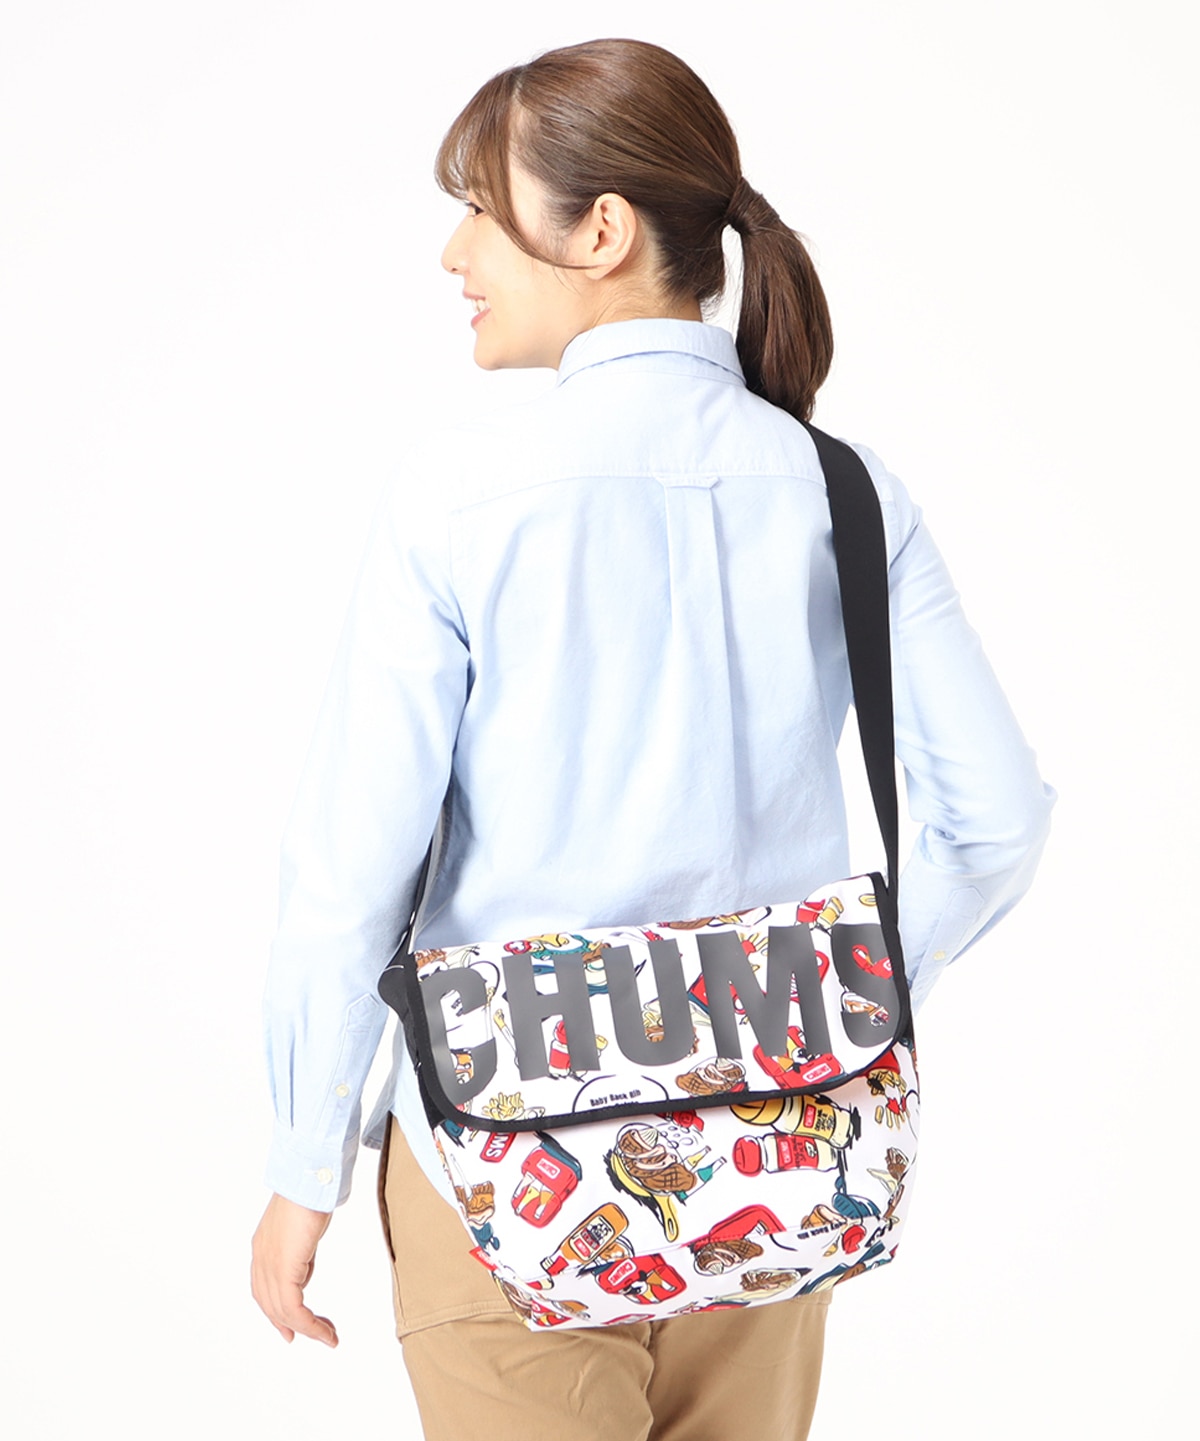 Recycle CHUMS Messenger Bag(リサイクルチャムスメッセンジャーバッグ(メッセンジャーバッグ｜ショルダーバッグ))